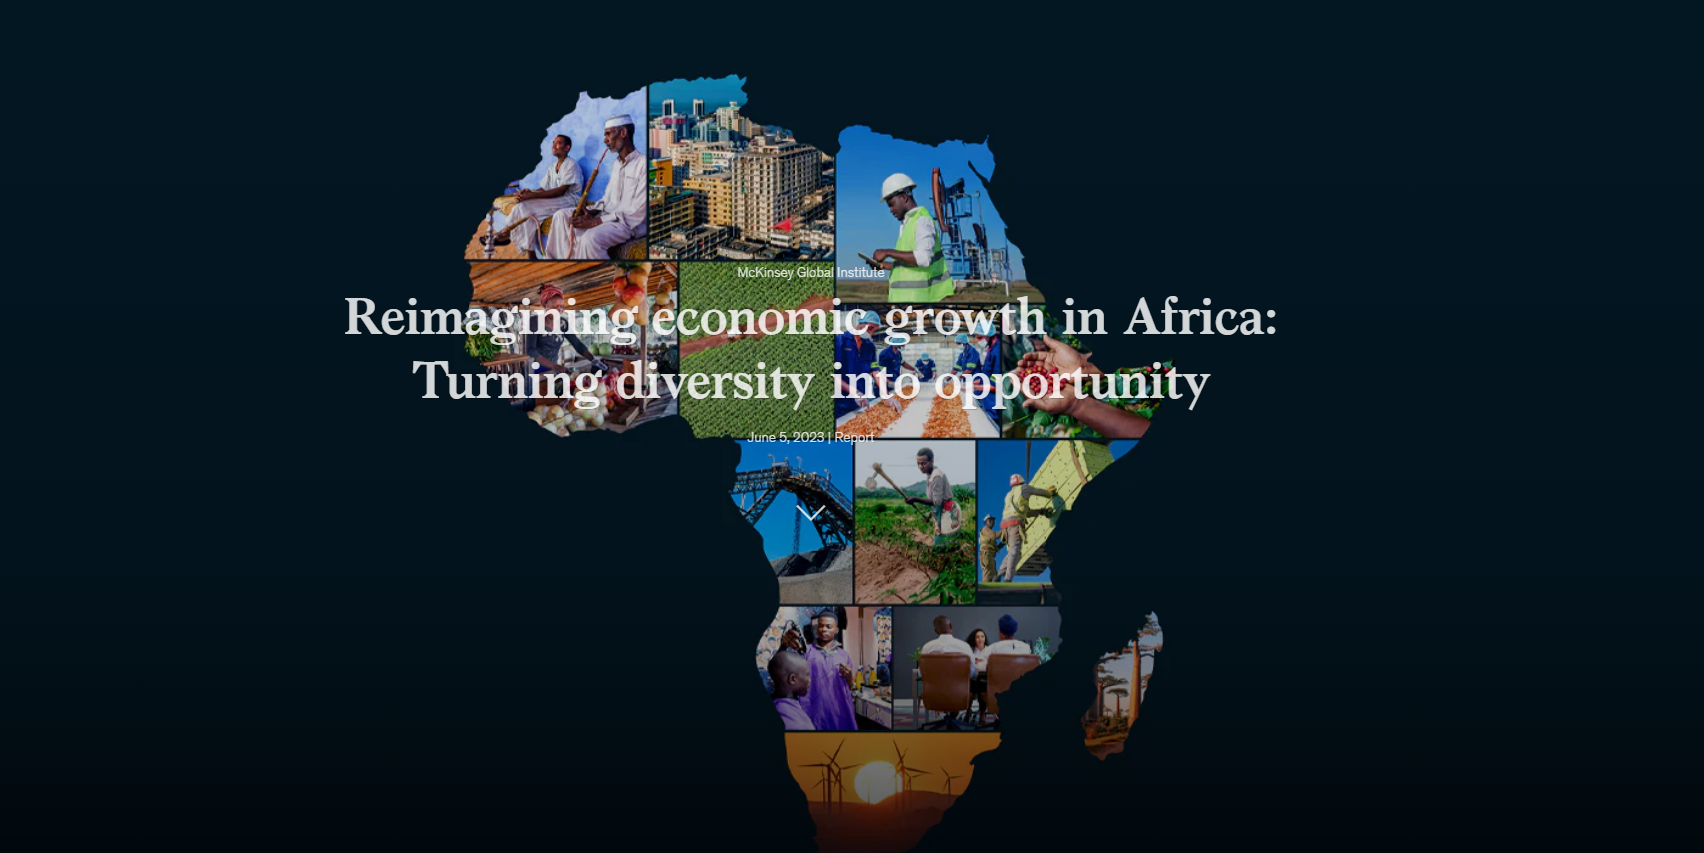 Reimagining economic growth in Africa: Turning diversity into opportunity